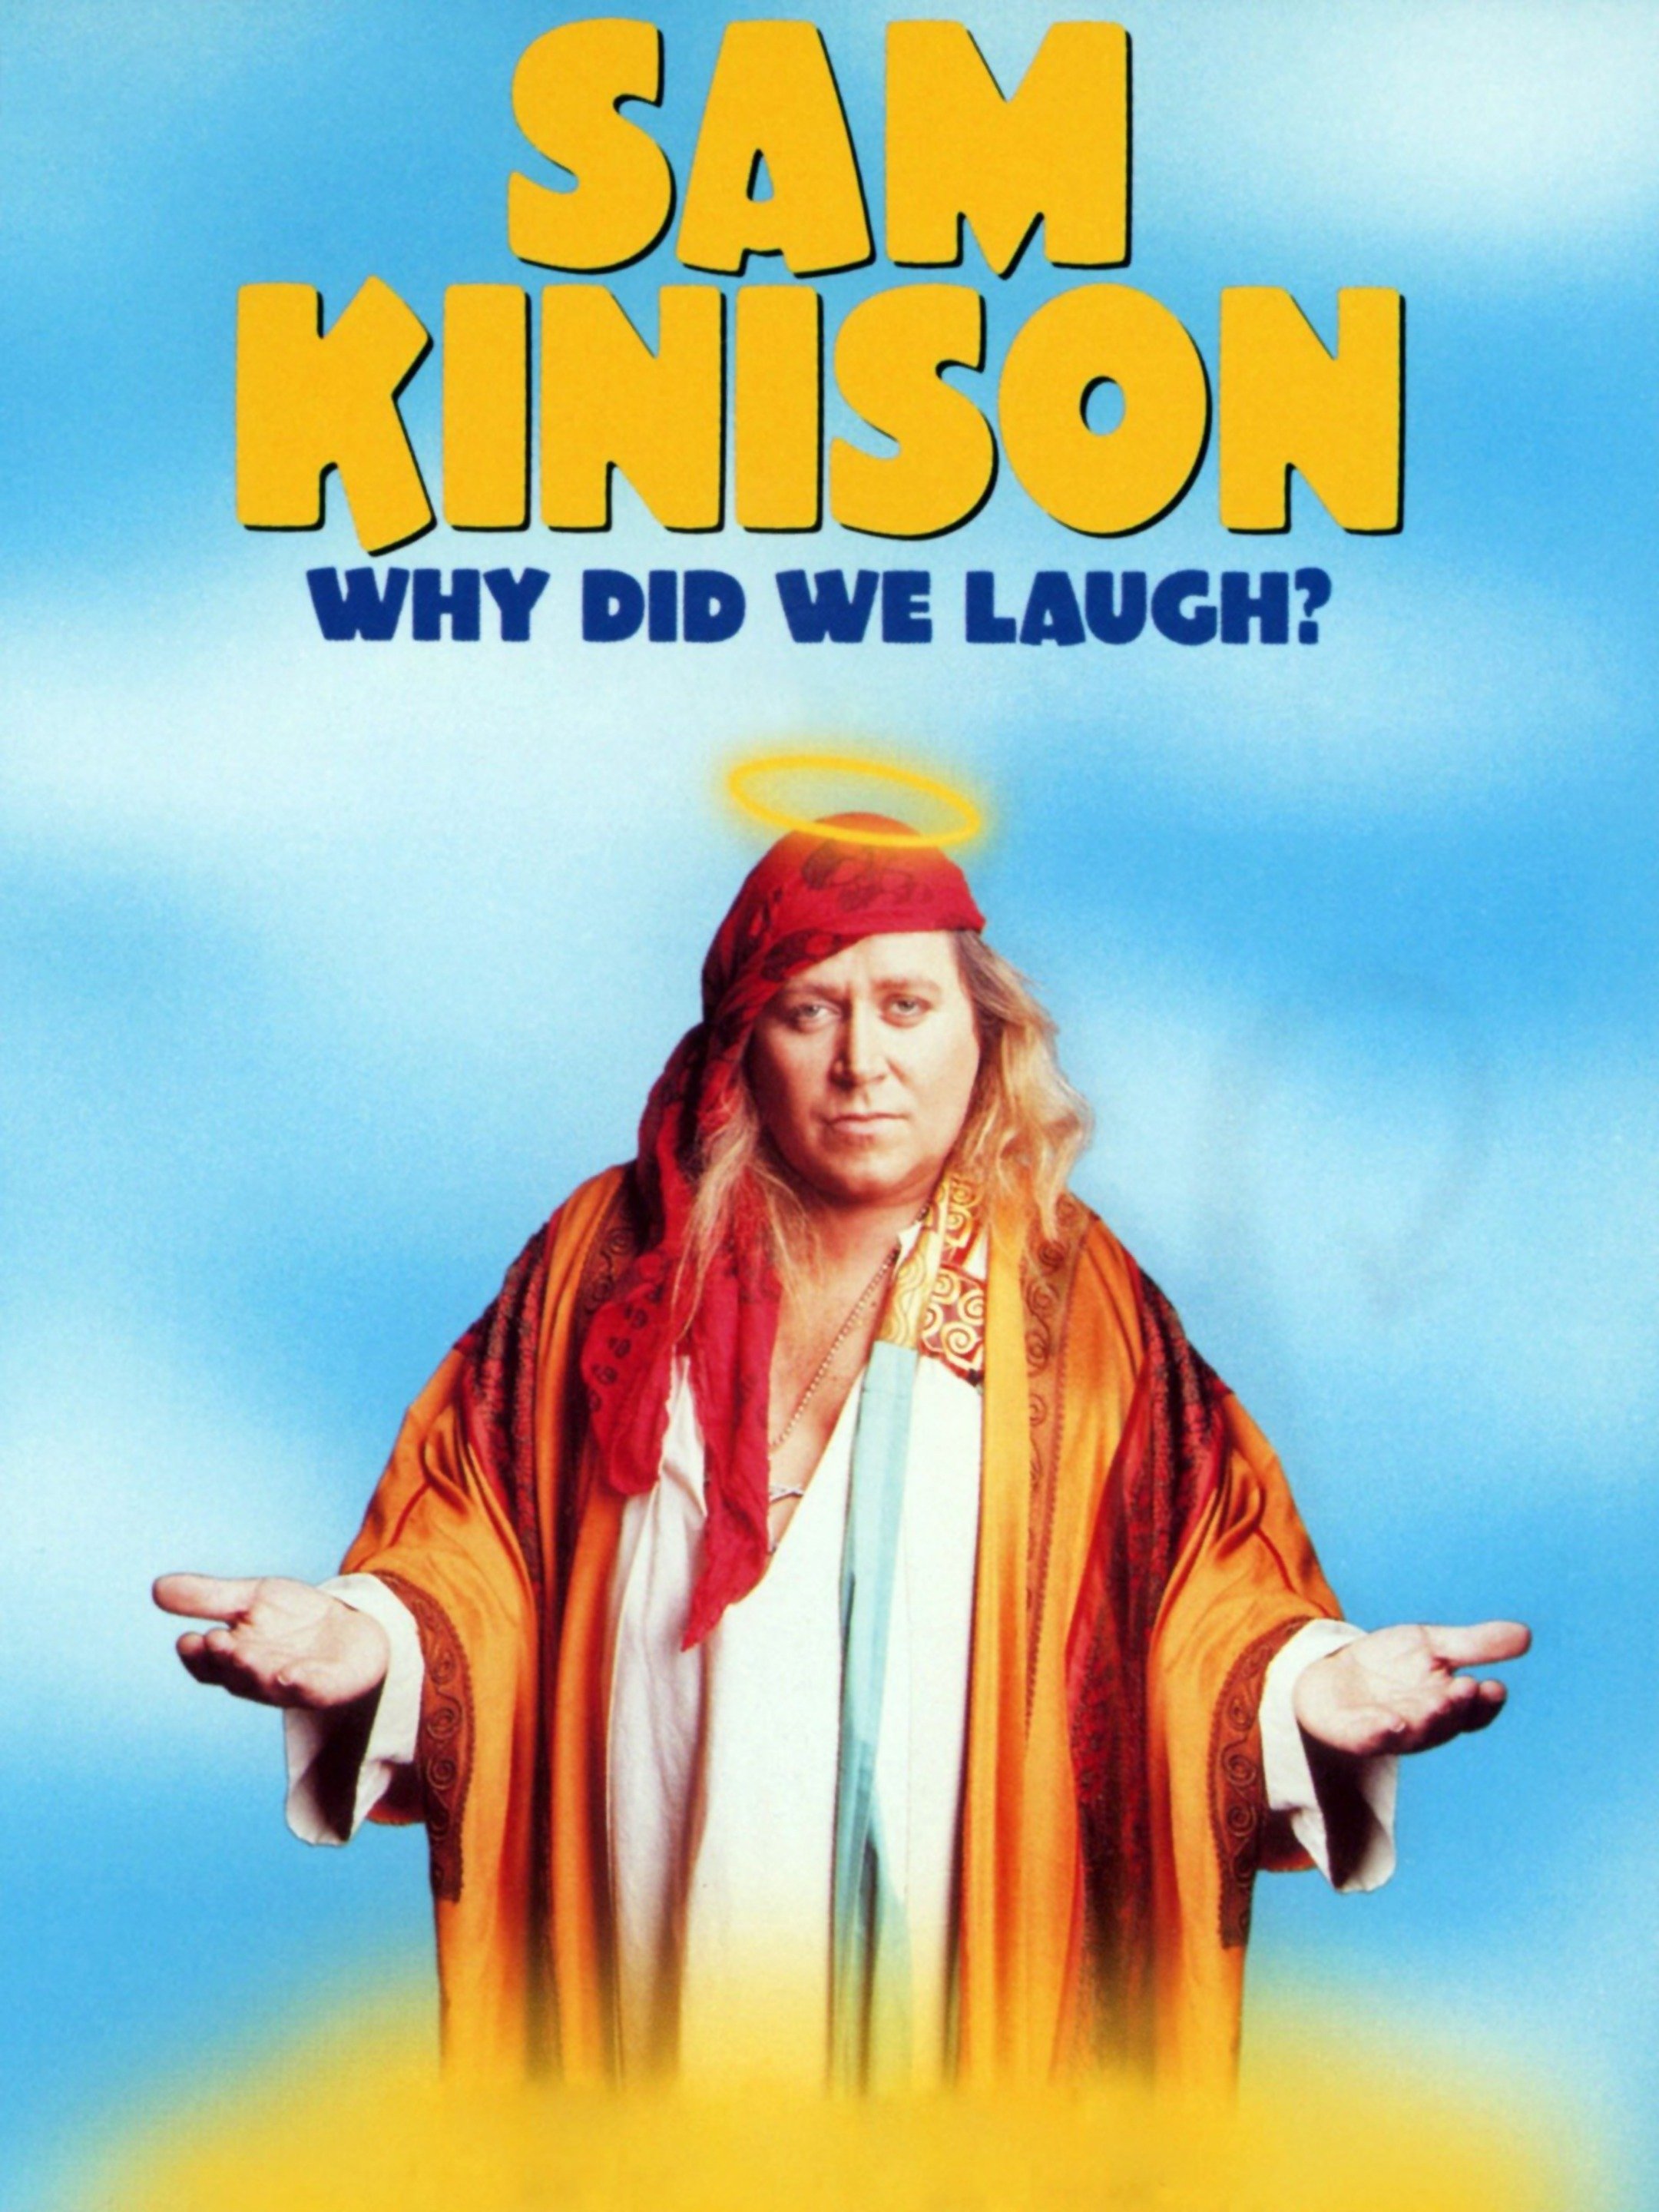 Sam Kinison Why Did We Laugh?